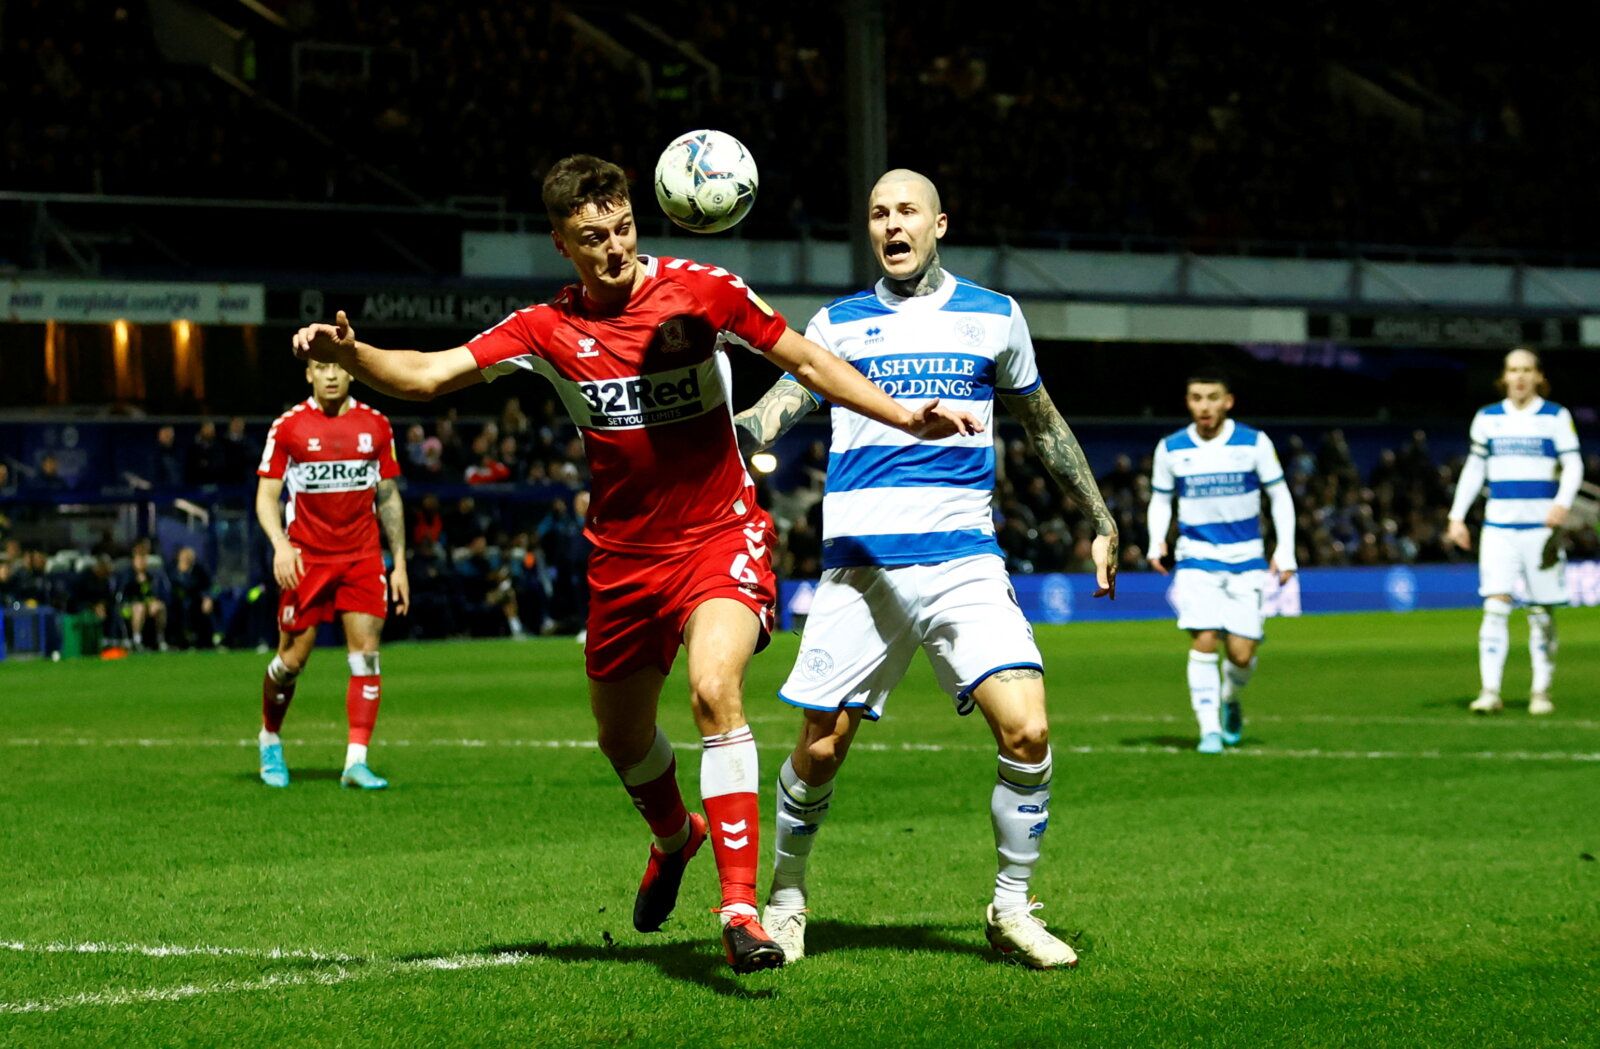 Soccer Football - Championship - Queens Park Rangers v Middlesbrough - Loftus Road, London, Britain - February 9, 2022  Middlesbrough's Dael Fry in action with Queens Park Rangers' Lyndon Dykes   Action Images/Andrew Boyers  EDITORIAL USE ONLY. No use with unauthorized audio, video, data, fixture lists, club/league logos or 